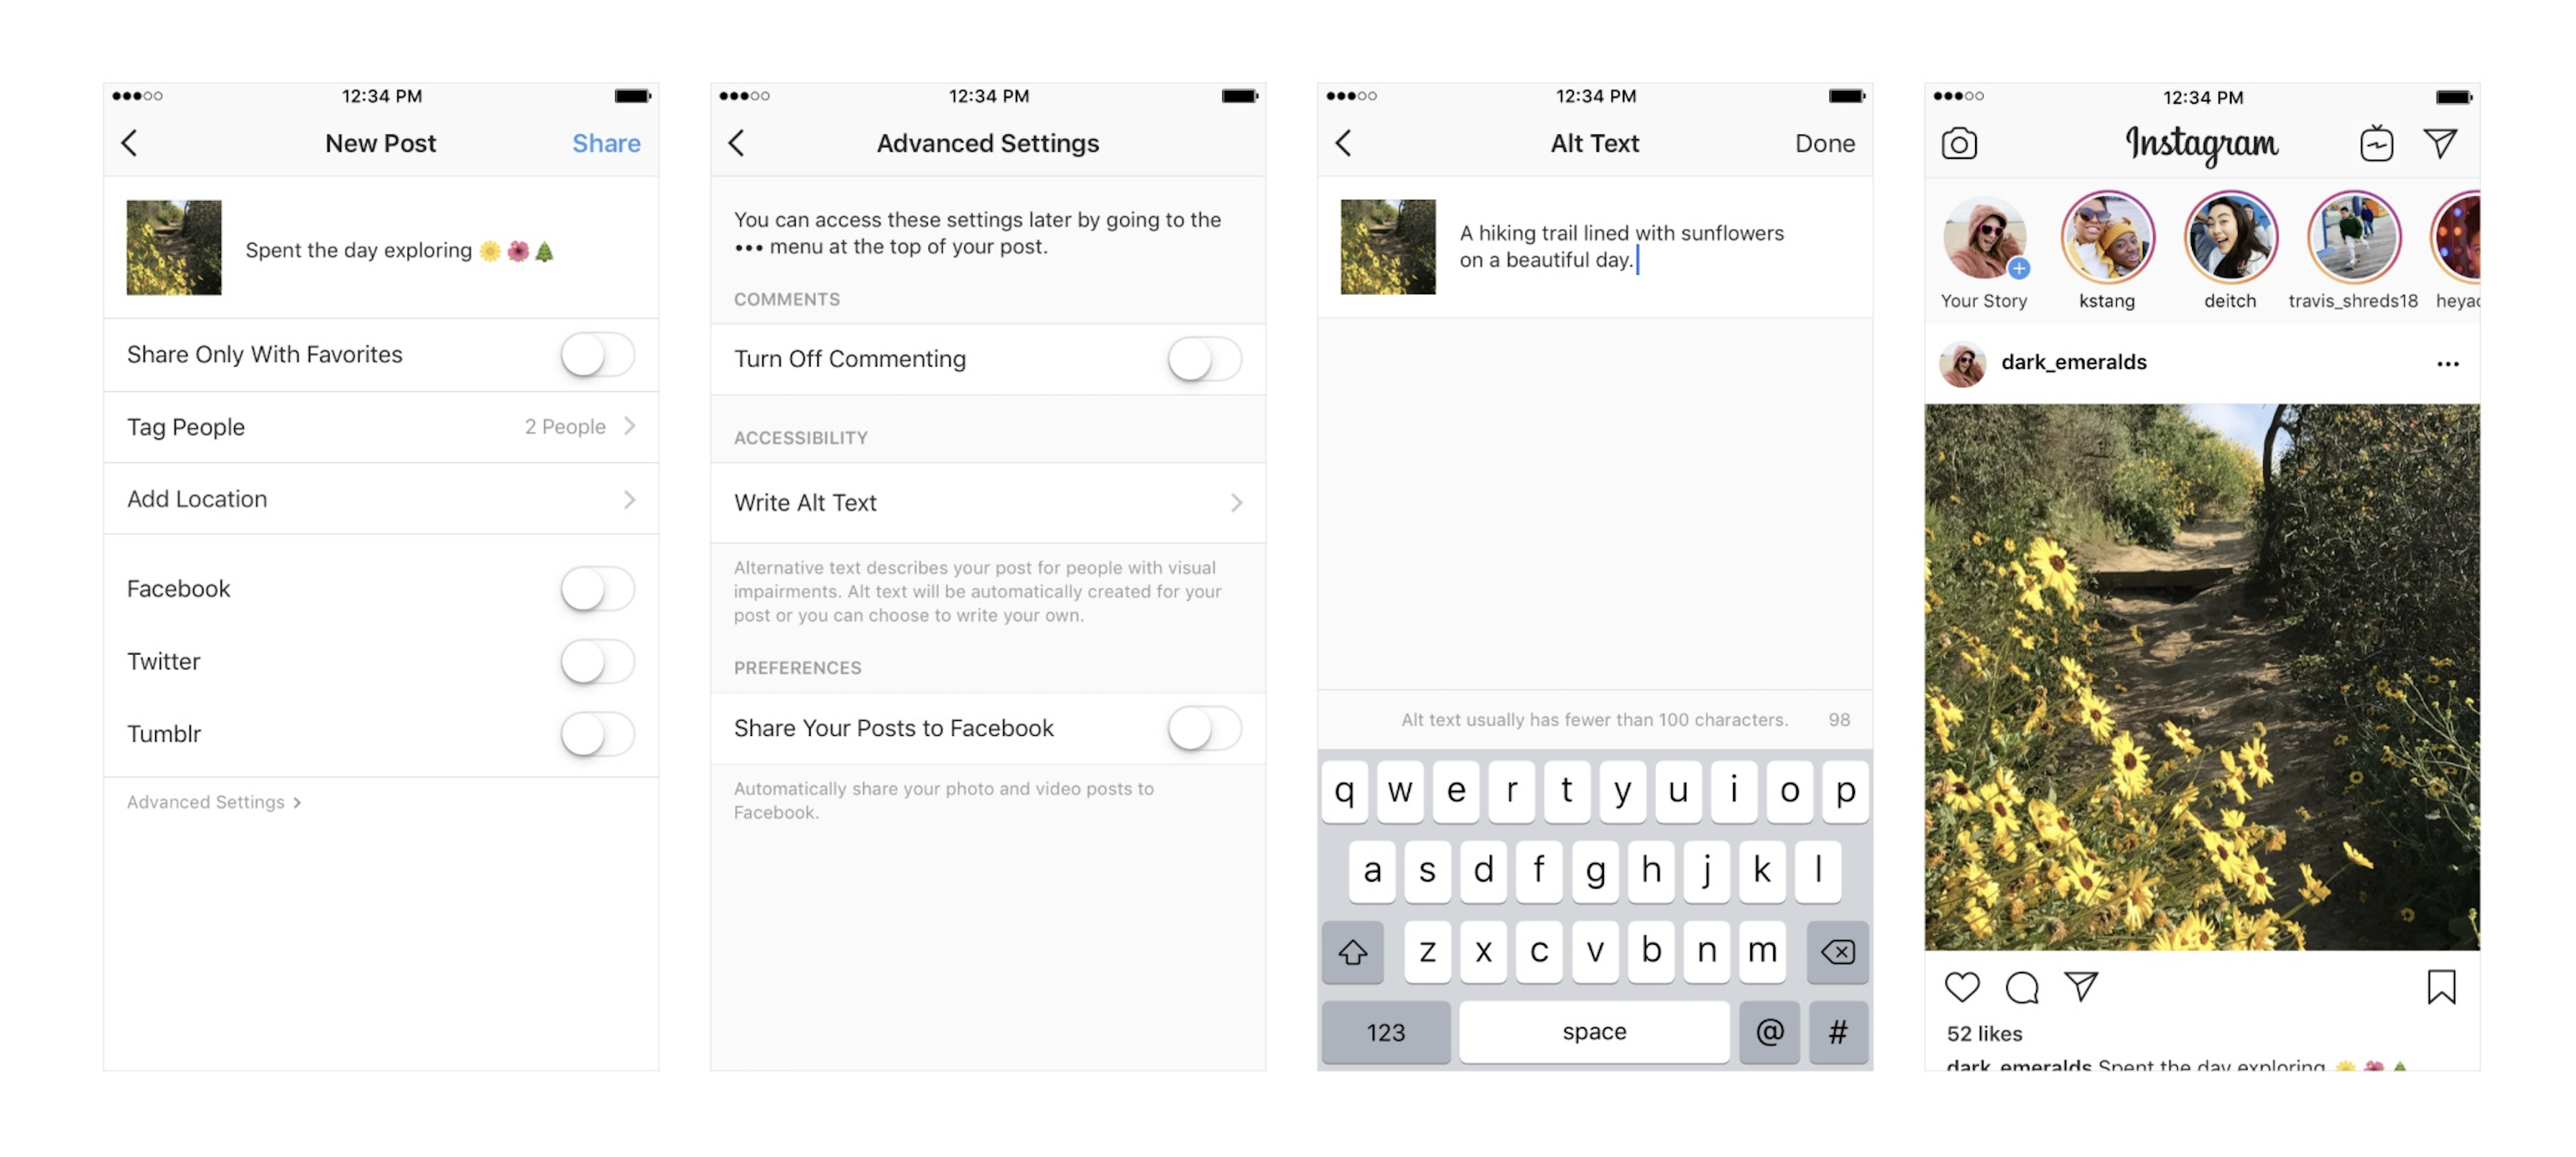 Instagram Launches Automatic Alternative Text To Make Platform